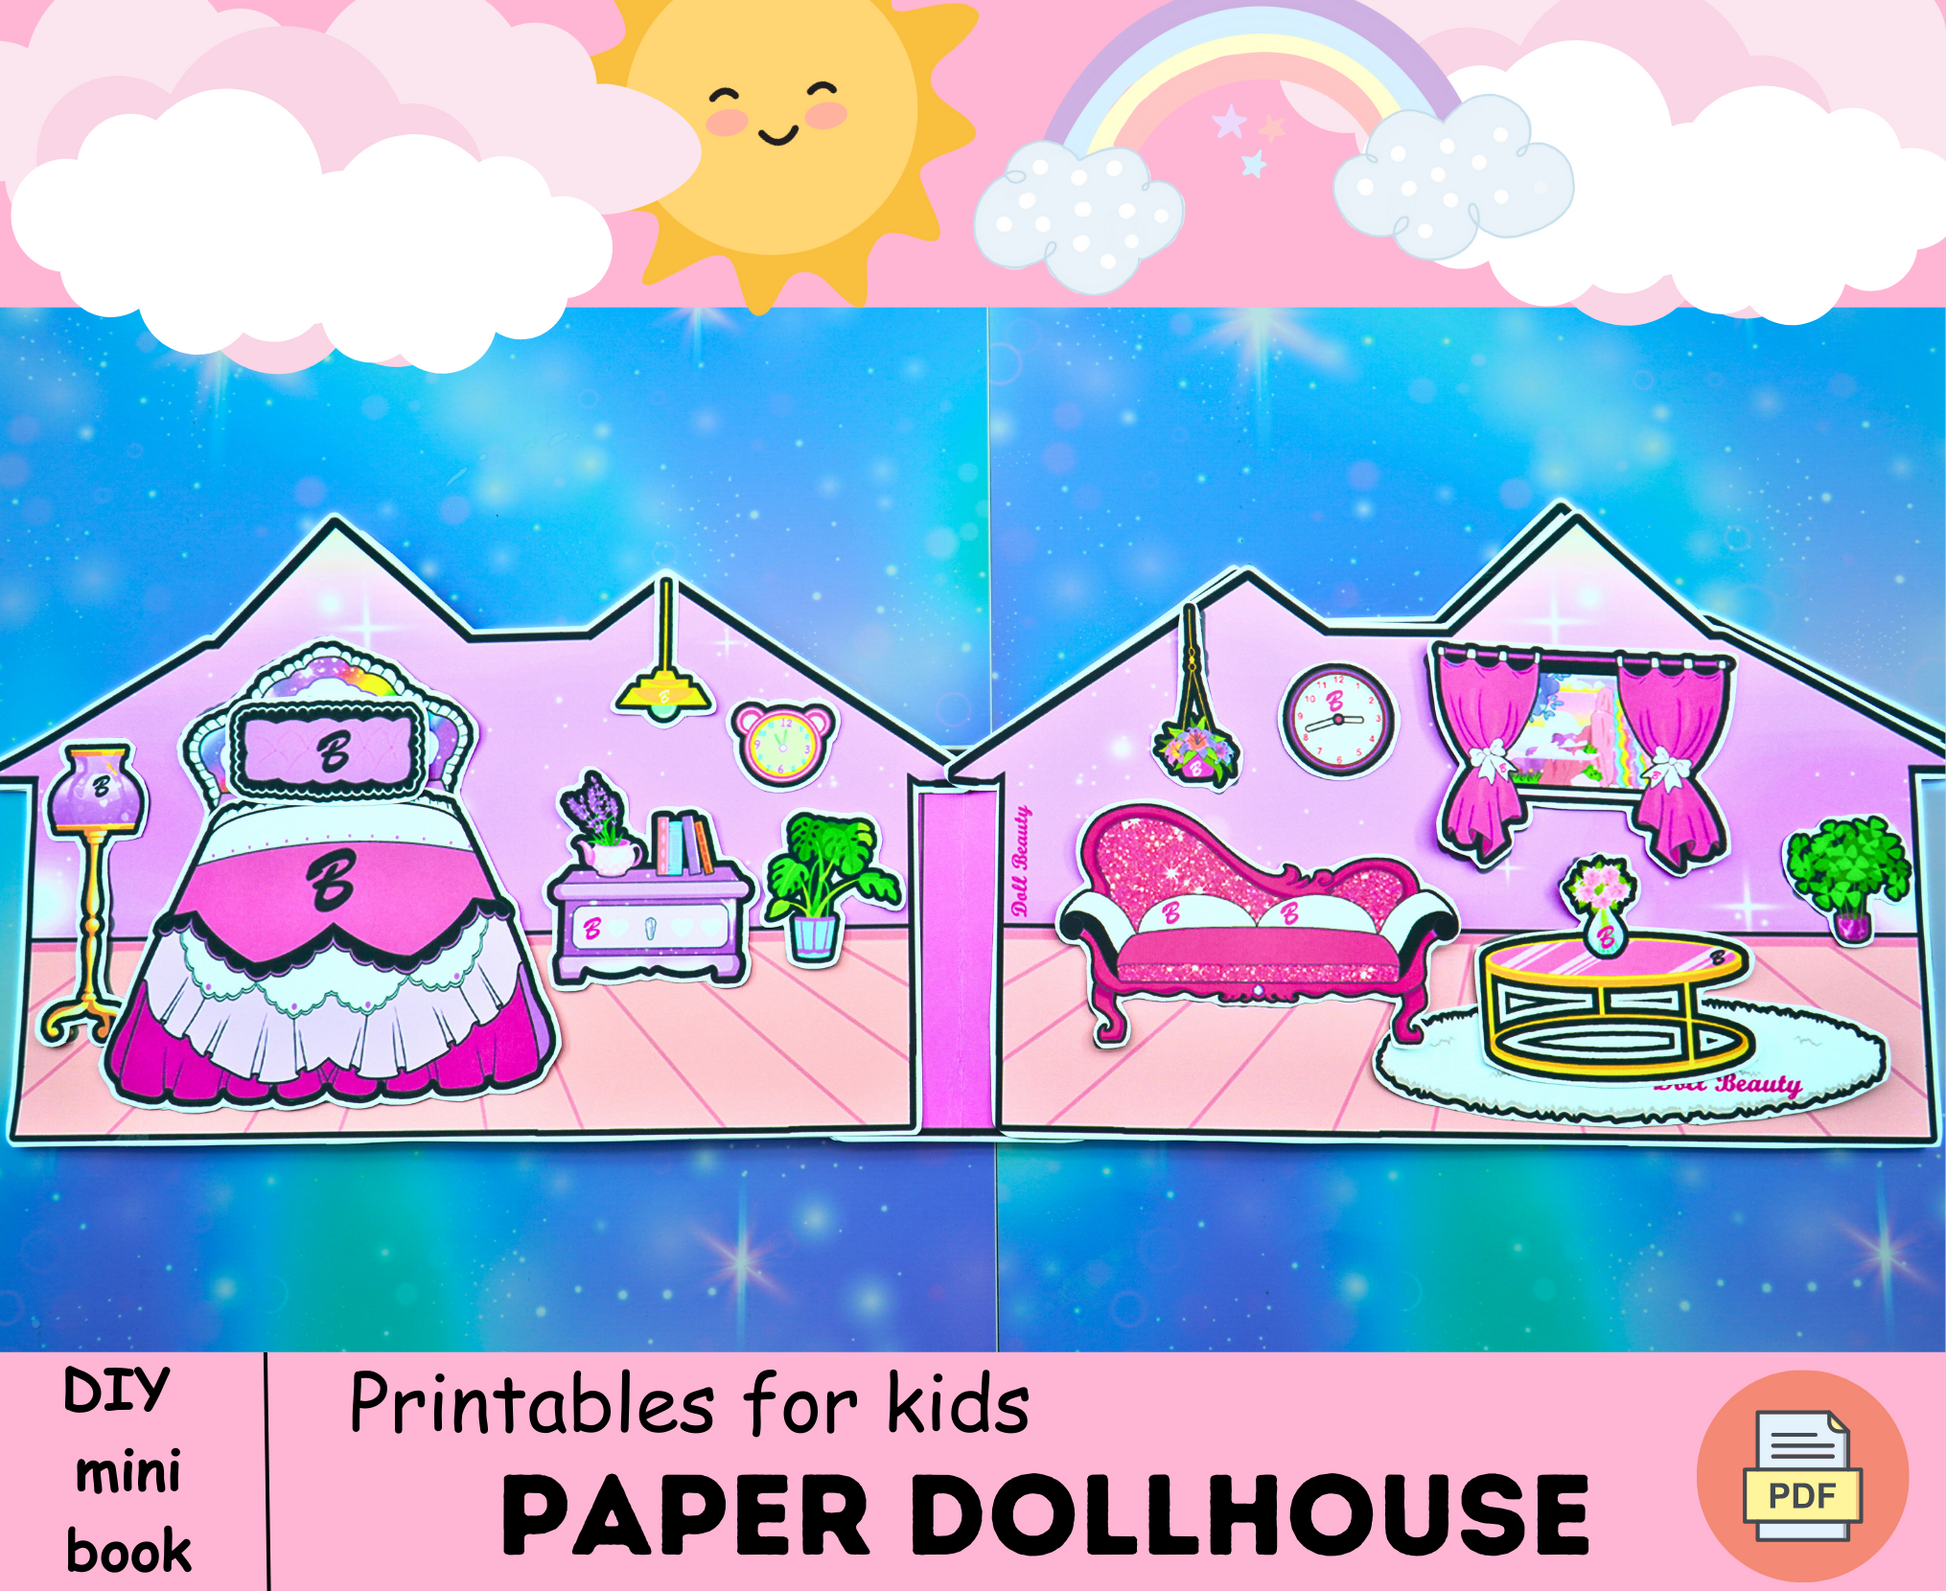 🏠🚗👩👨👶SIMPLE DOLLHOUSE OF PAPER FOR KIDS HANDMADE FOR PAPER DOLLS 